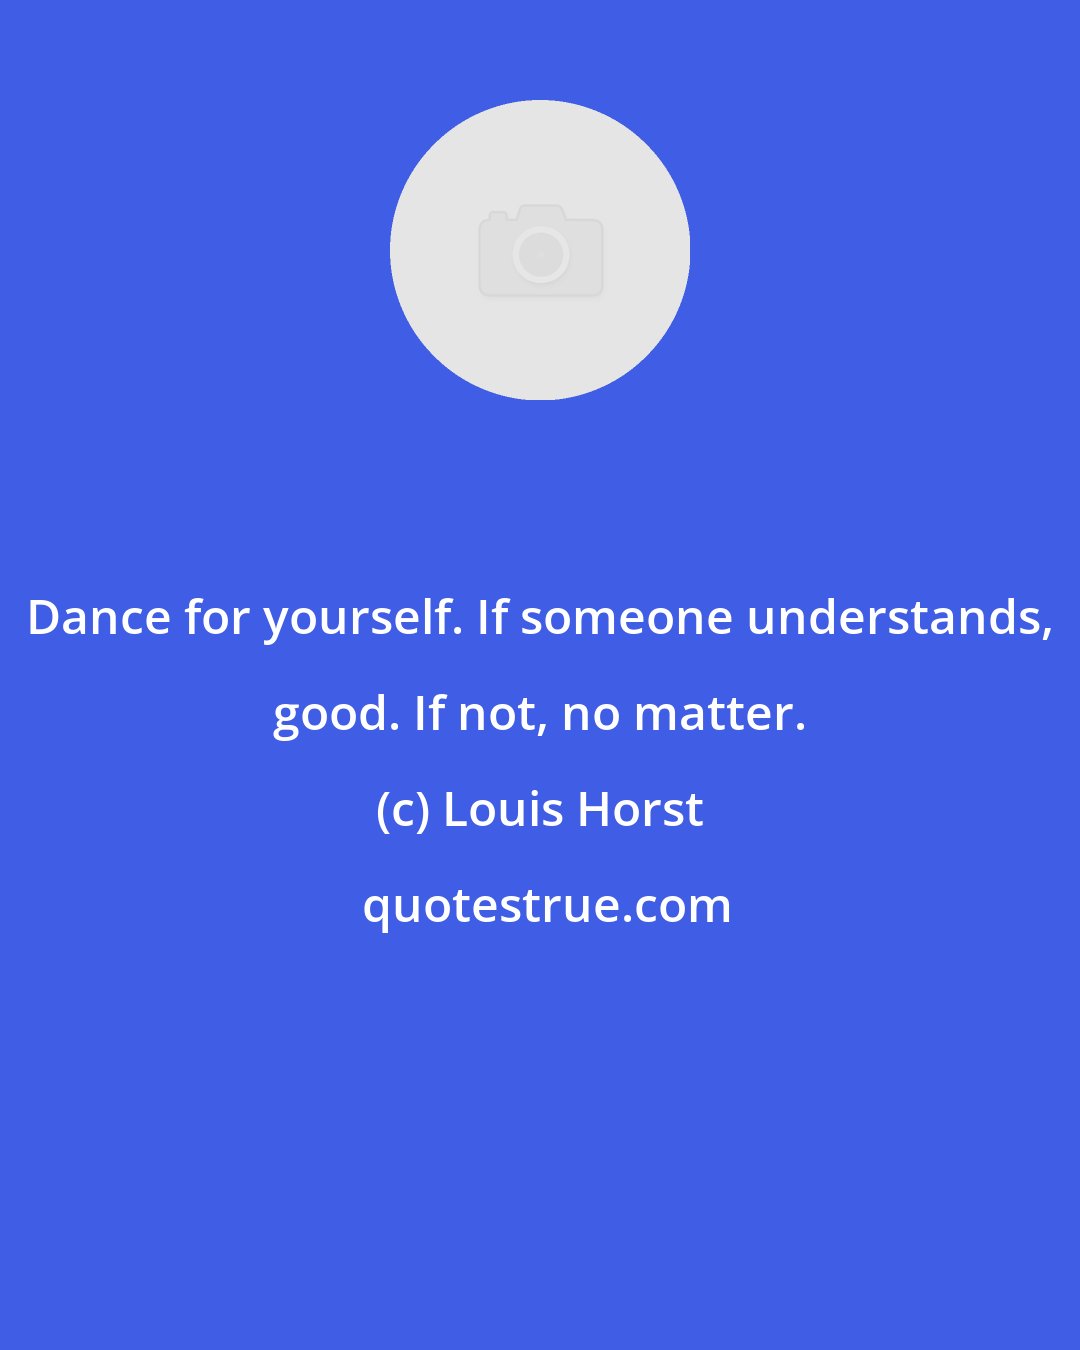 Louis Horst: Dance for yourself. If someone understands, good. If not, no matter.